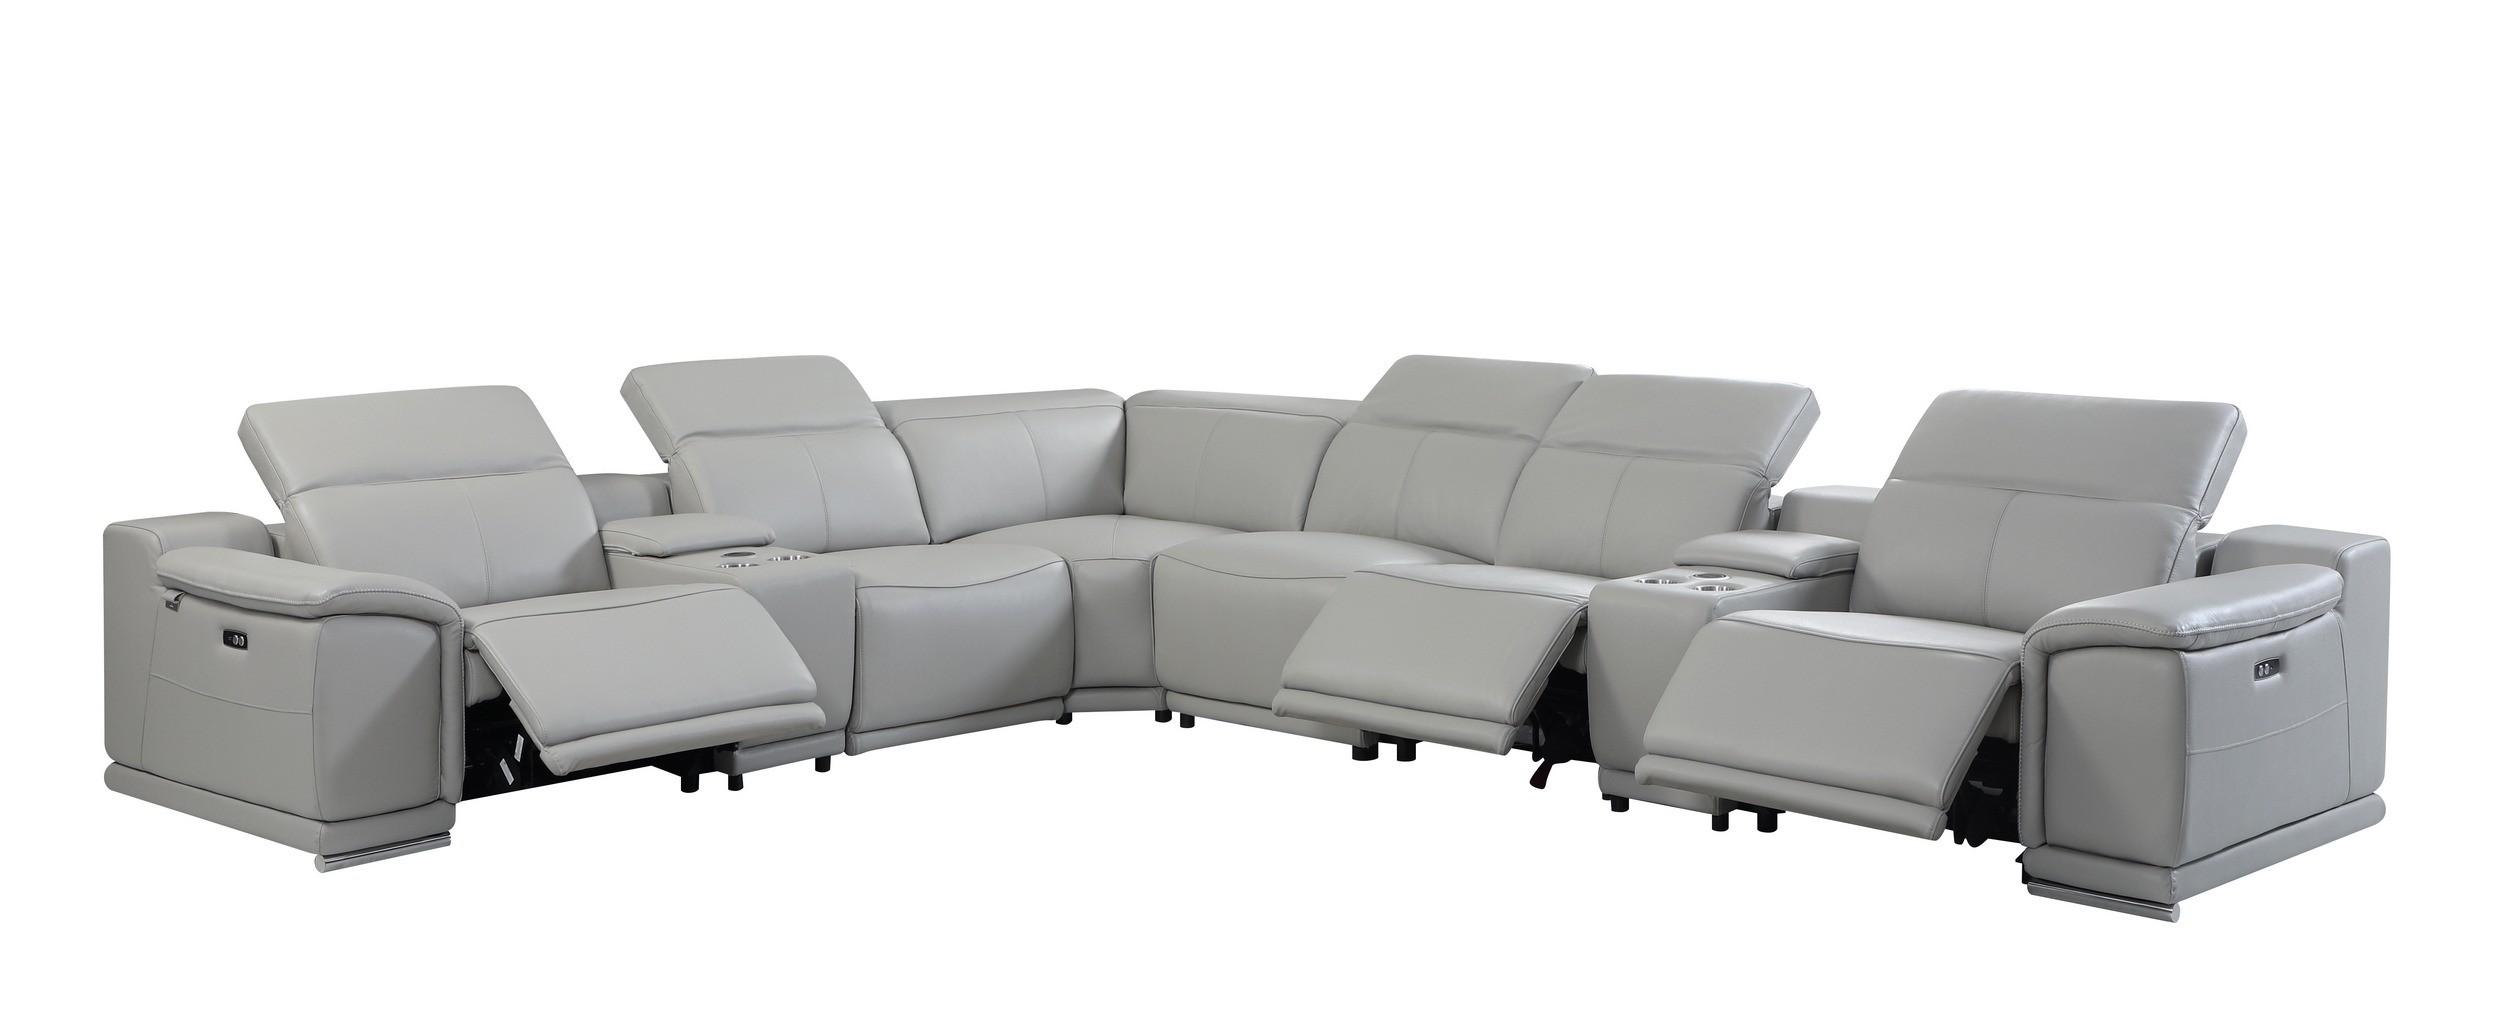 

    
LIGHT GRAY 3-Power Reclining 8PC Sectional /w 2-Consoles 9762 Global United
